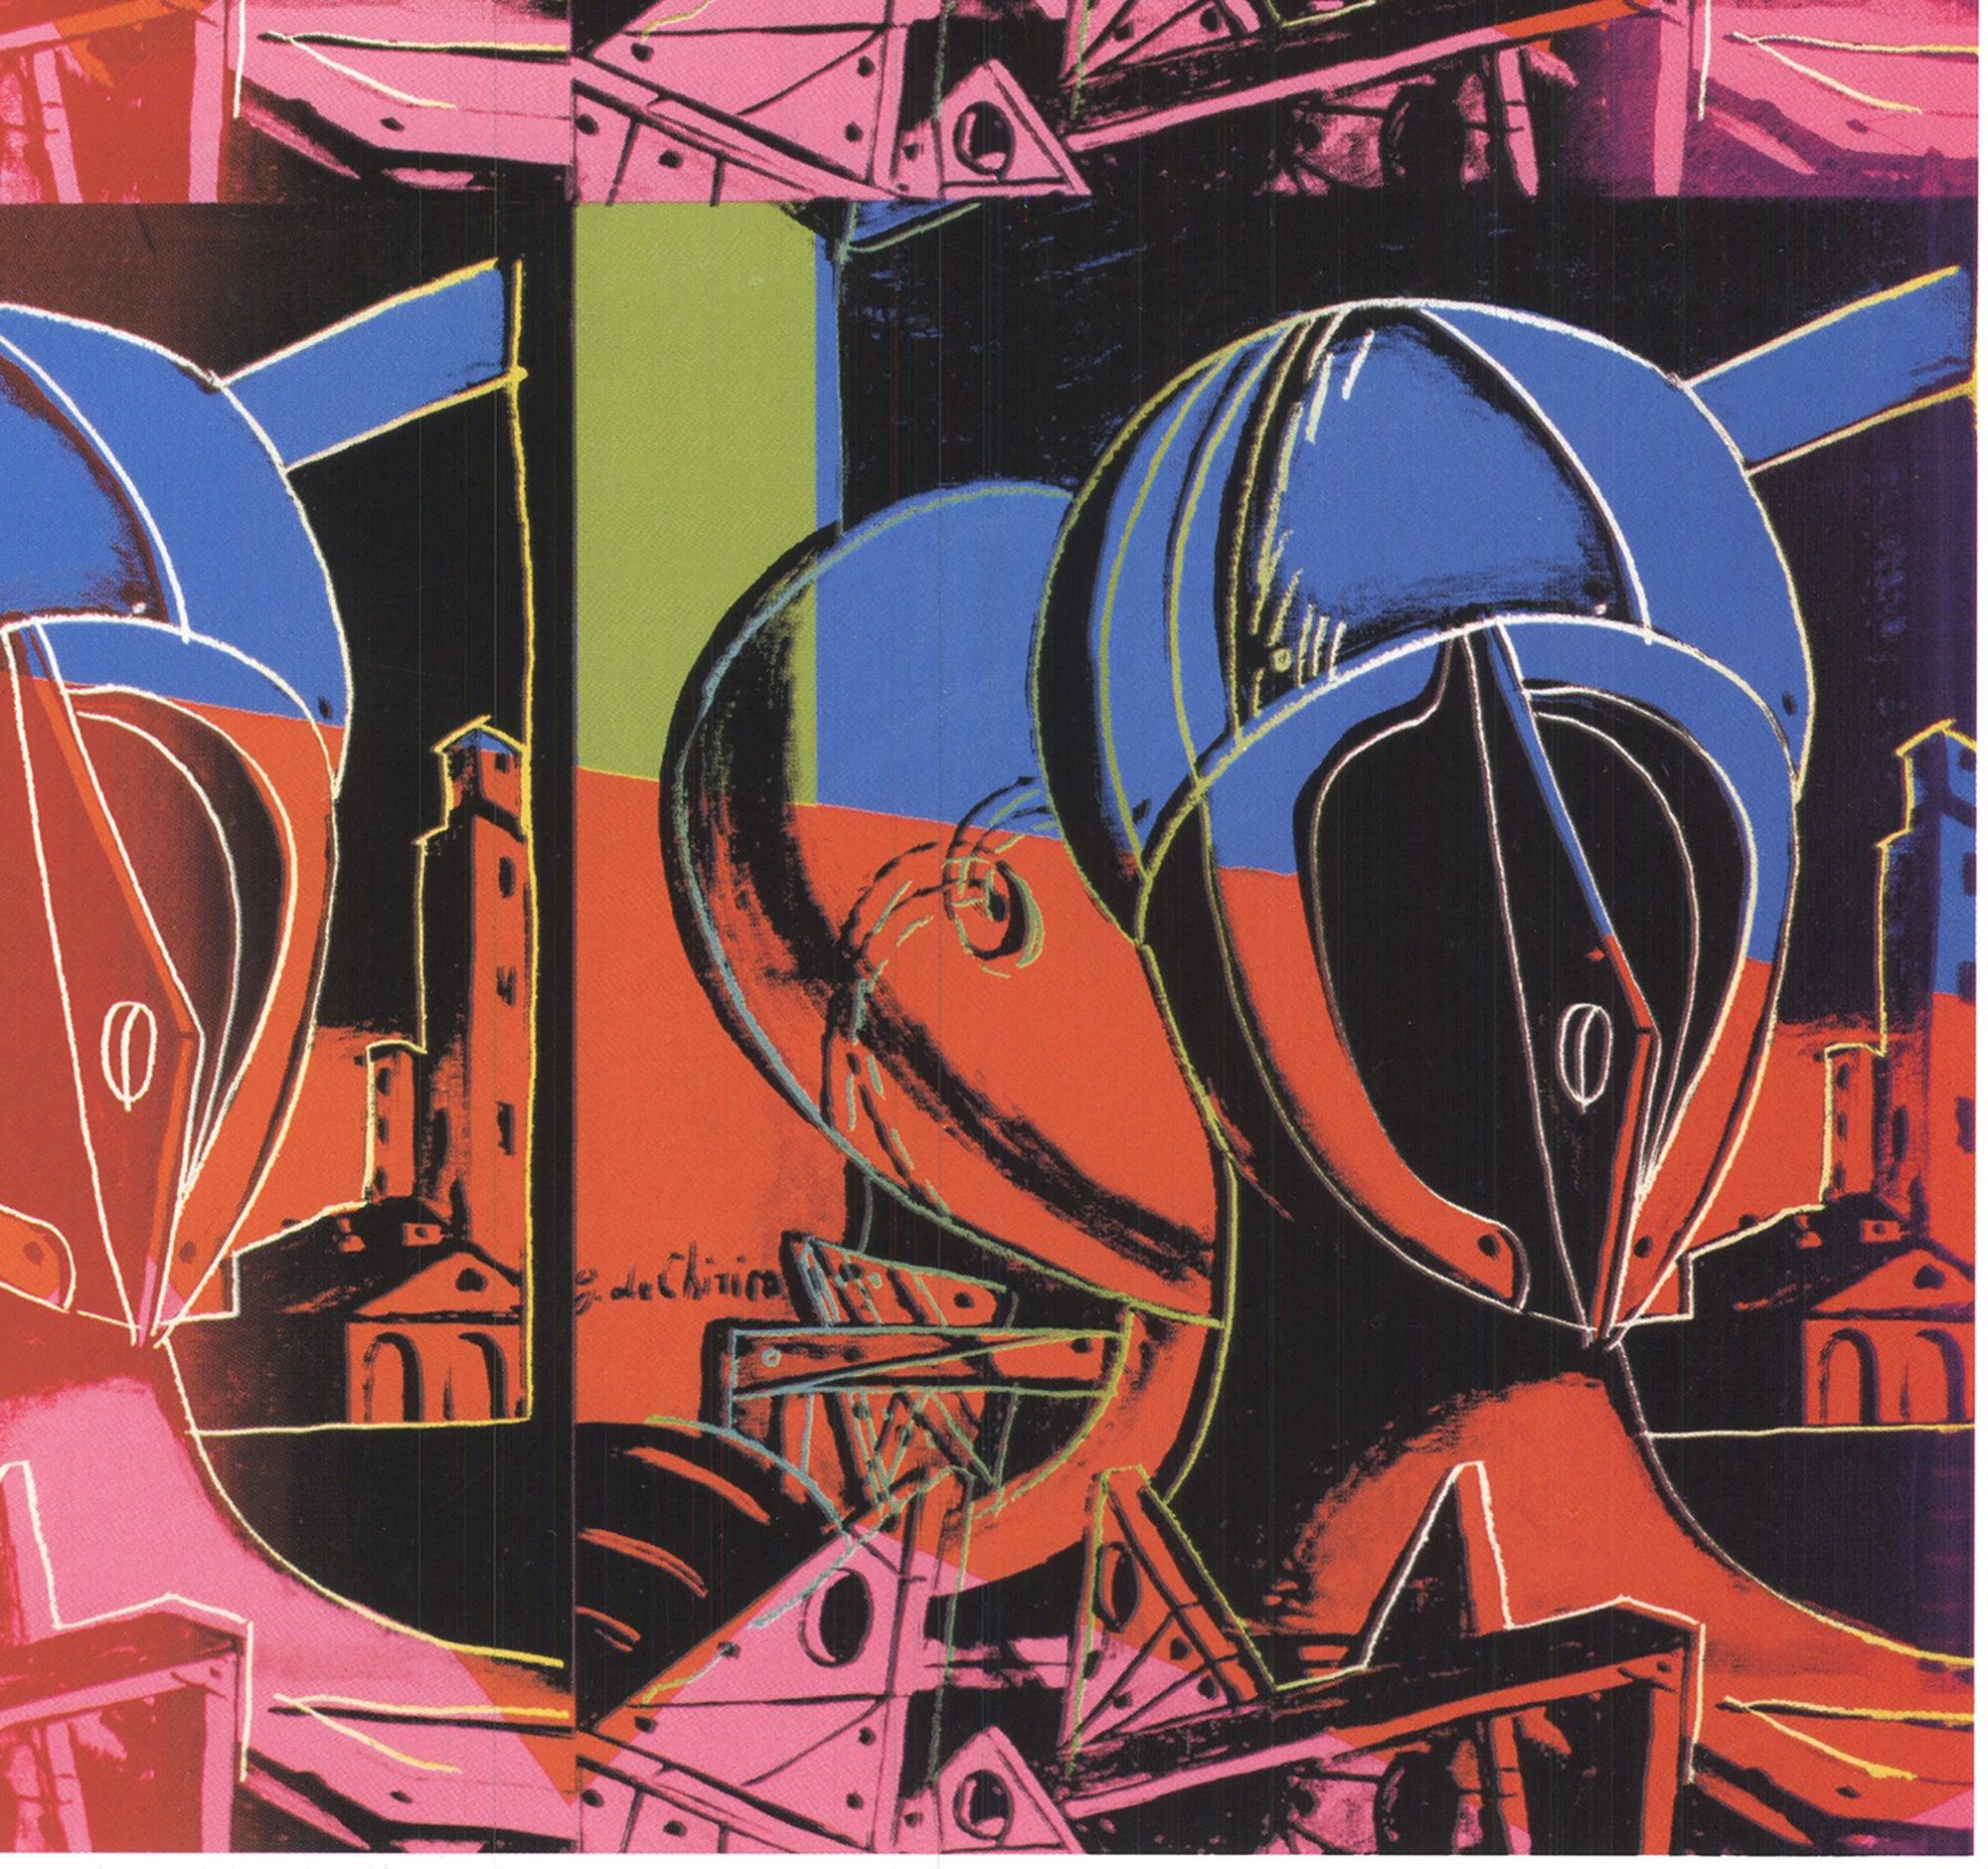 2002 Andy Warhol 'The Two Sisters (After de Chirico)' Pop Art Offset Lithograph 2